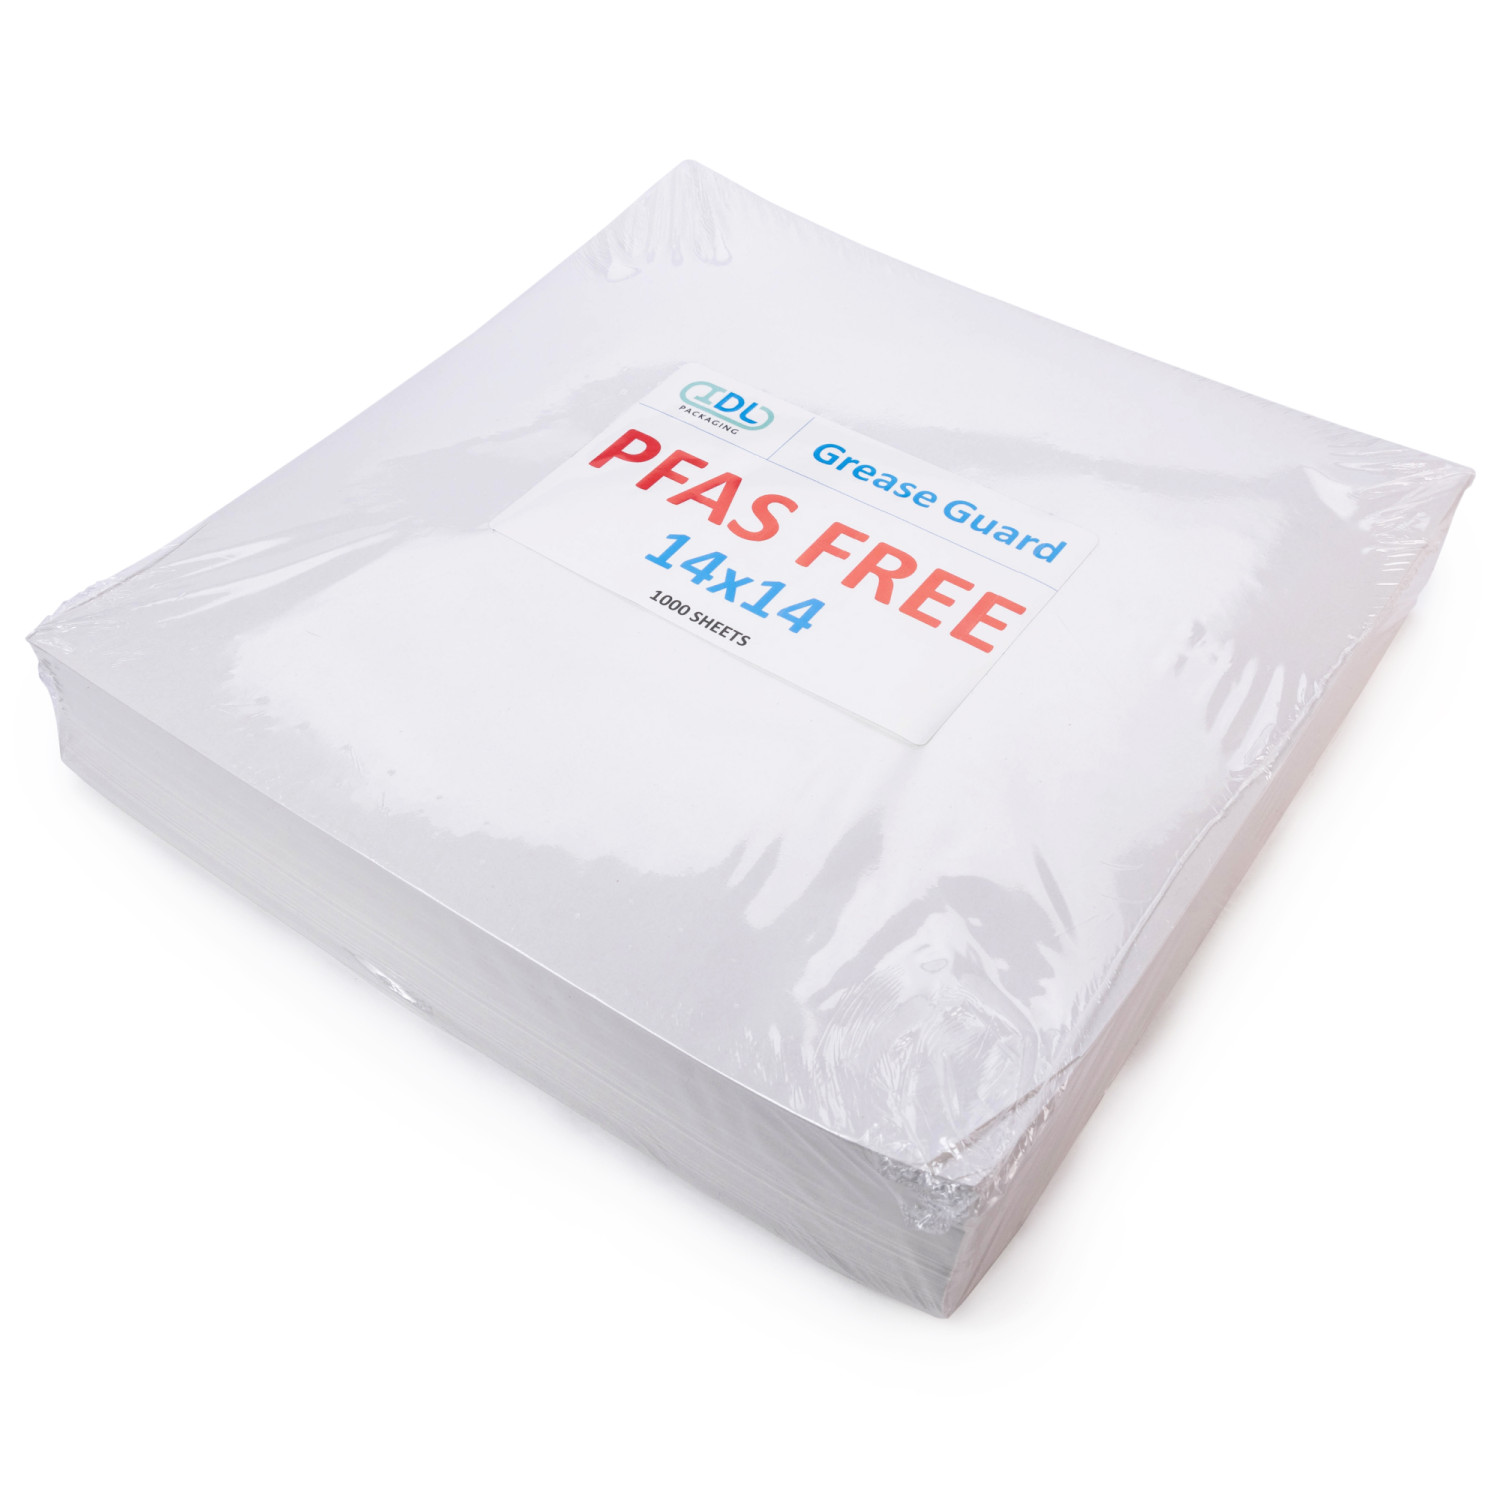 Unprinted White Greaseproof Sheets